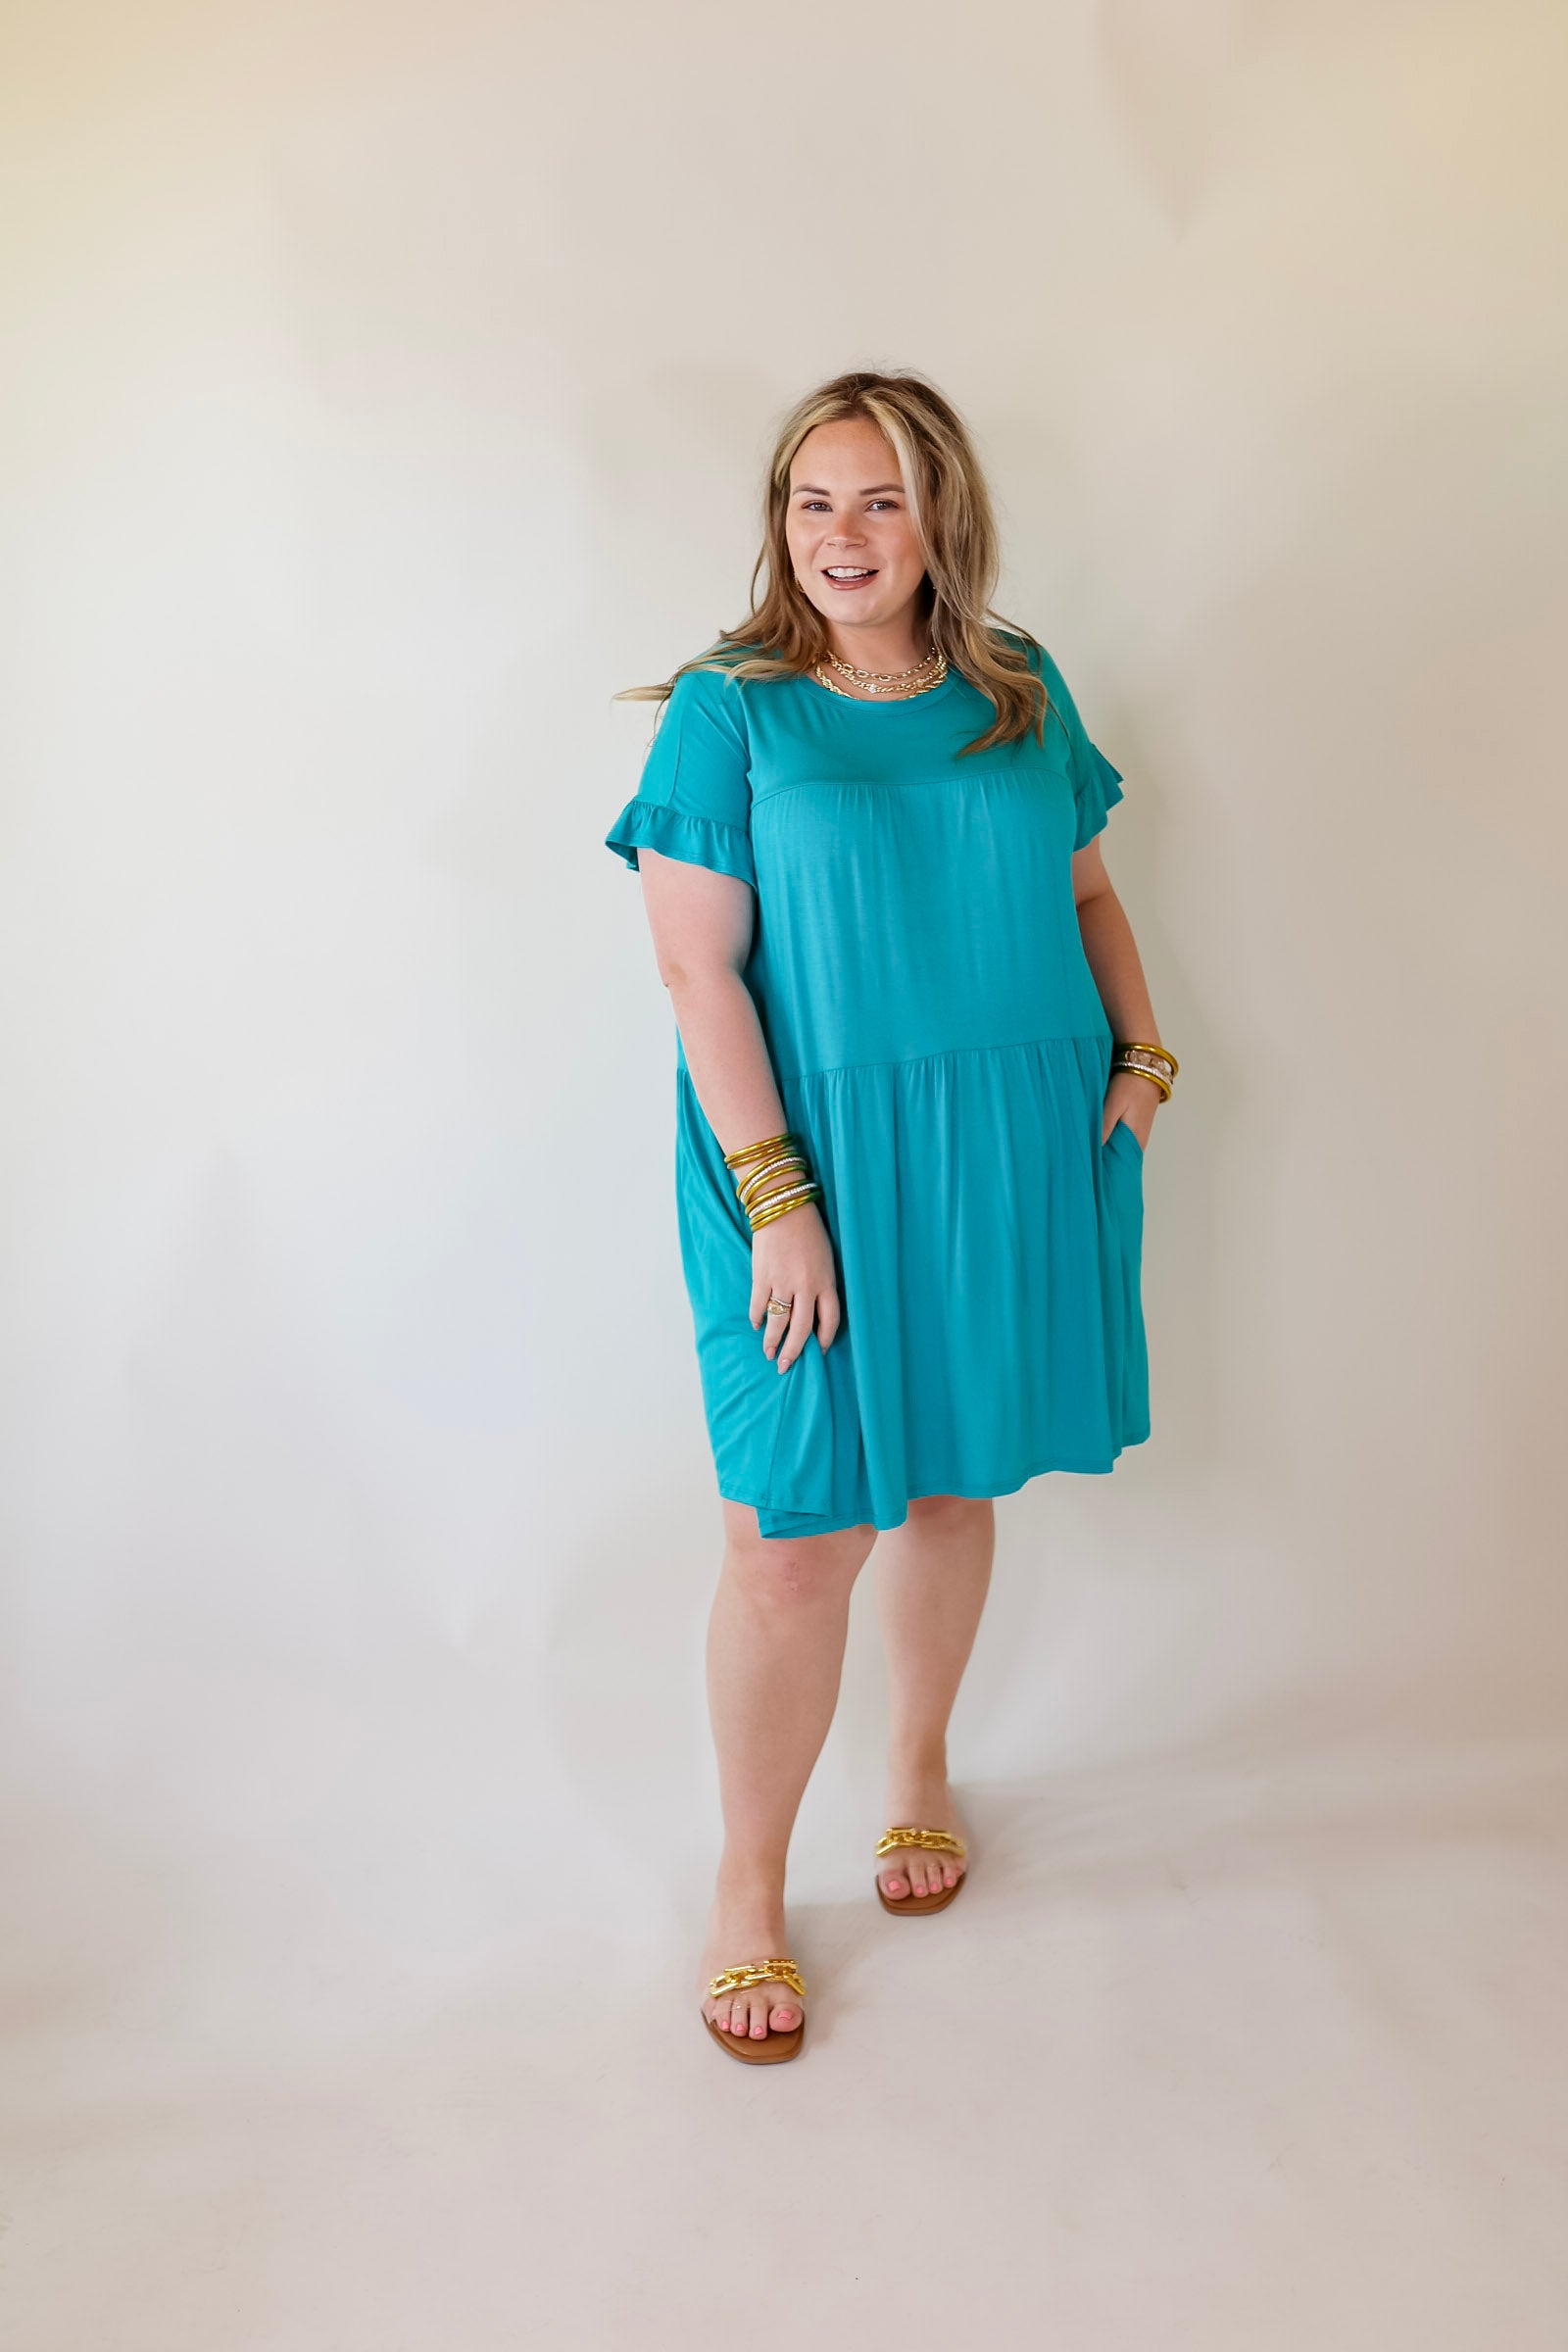 Gorgeous Girly Ruffle Sleeve Tiered Dress in Teal - Giddy Up Glamour Boutique